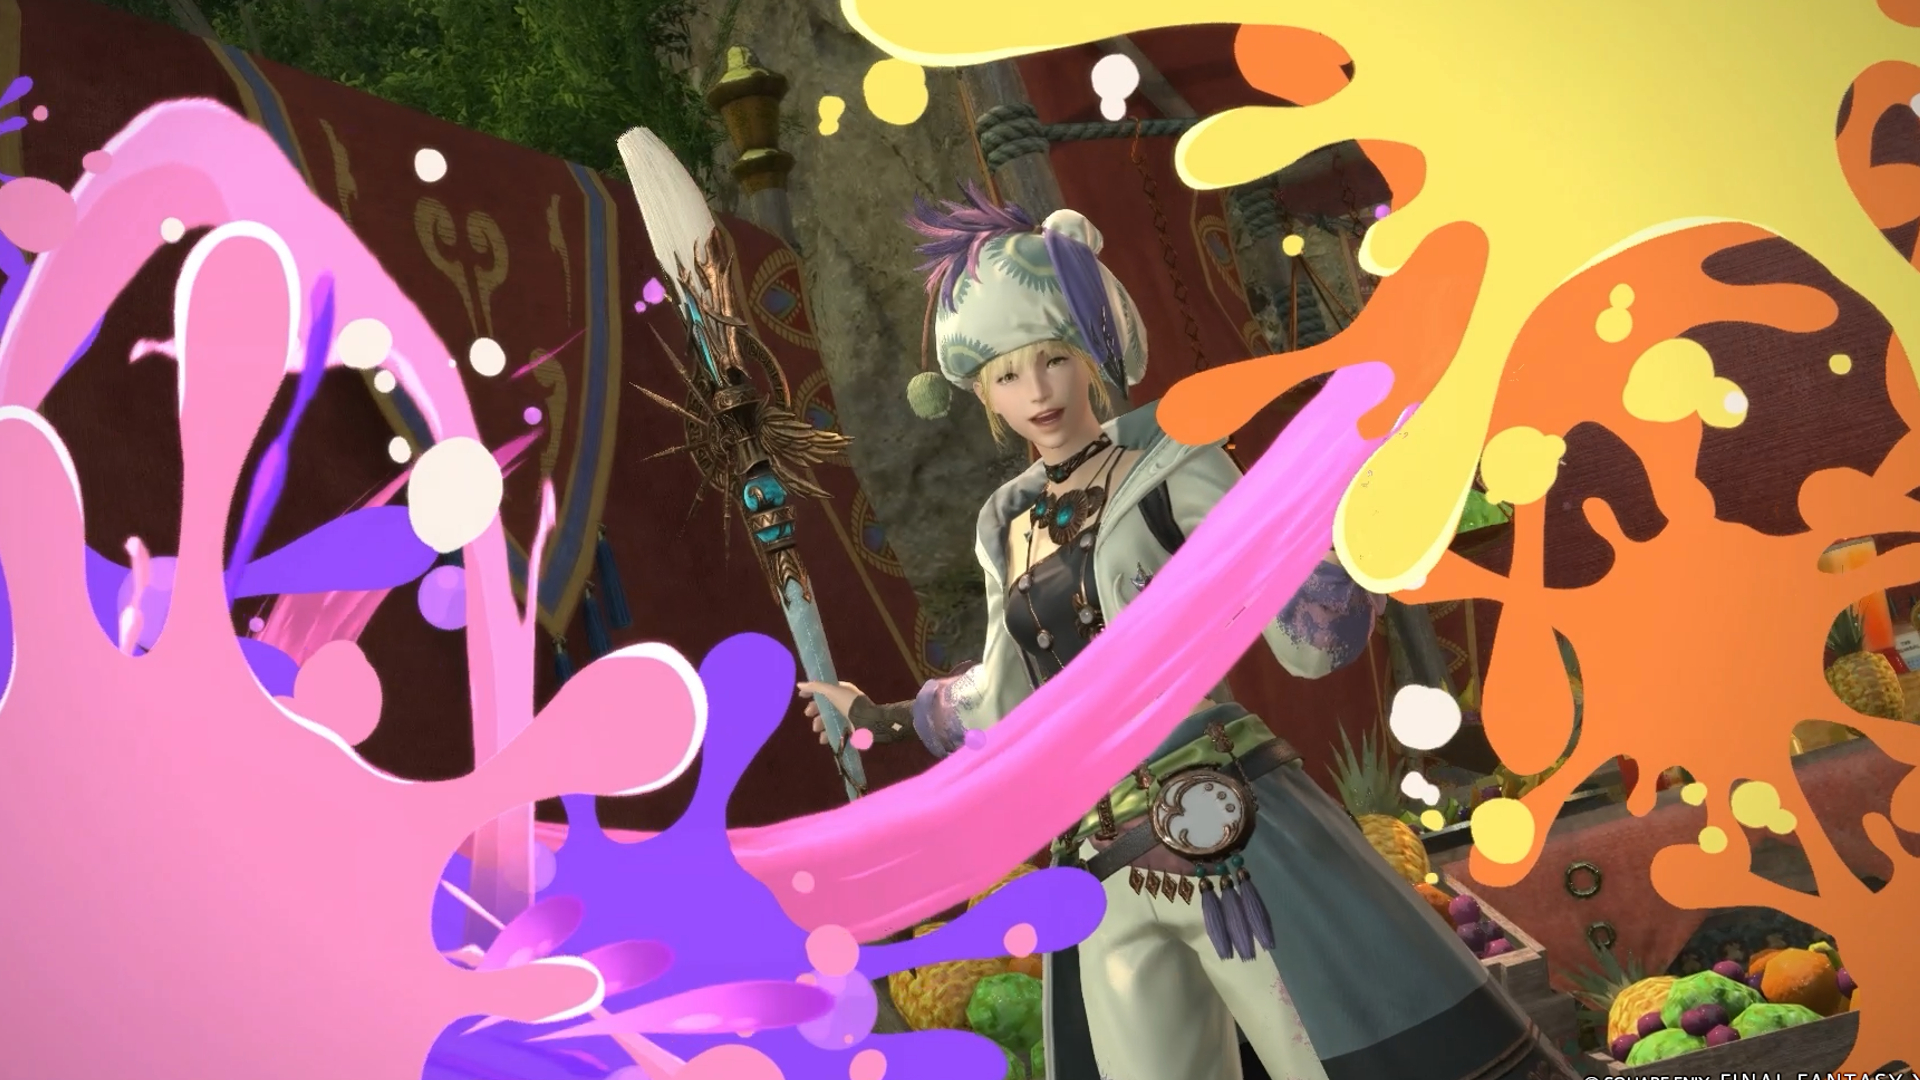  Final Fantasy 14's director confirms that no, Pictomancers weren't meant to manually remove their own buffs for a 1% DPS increase—outlines other job changes for patch 7.01 of Dawntrail 